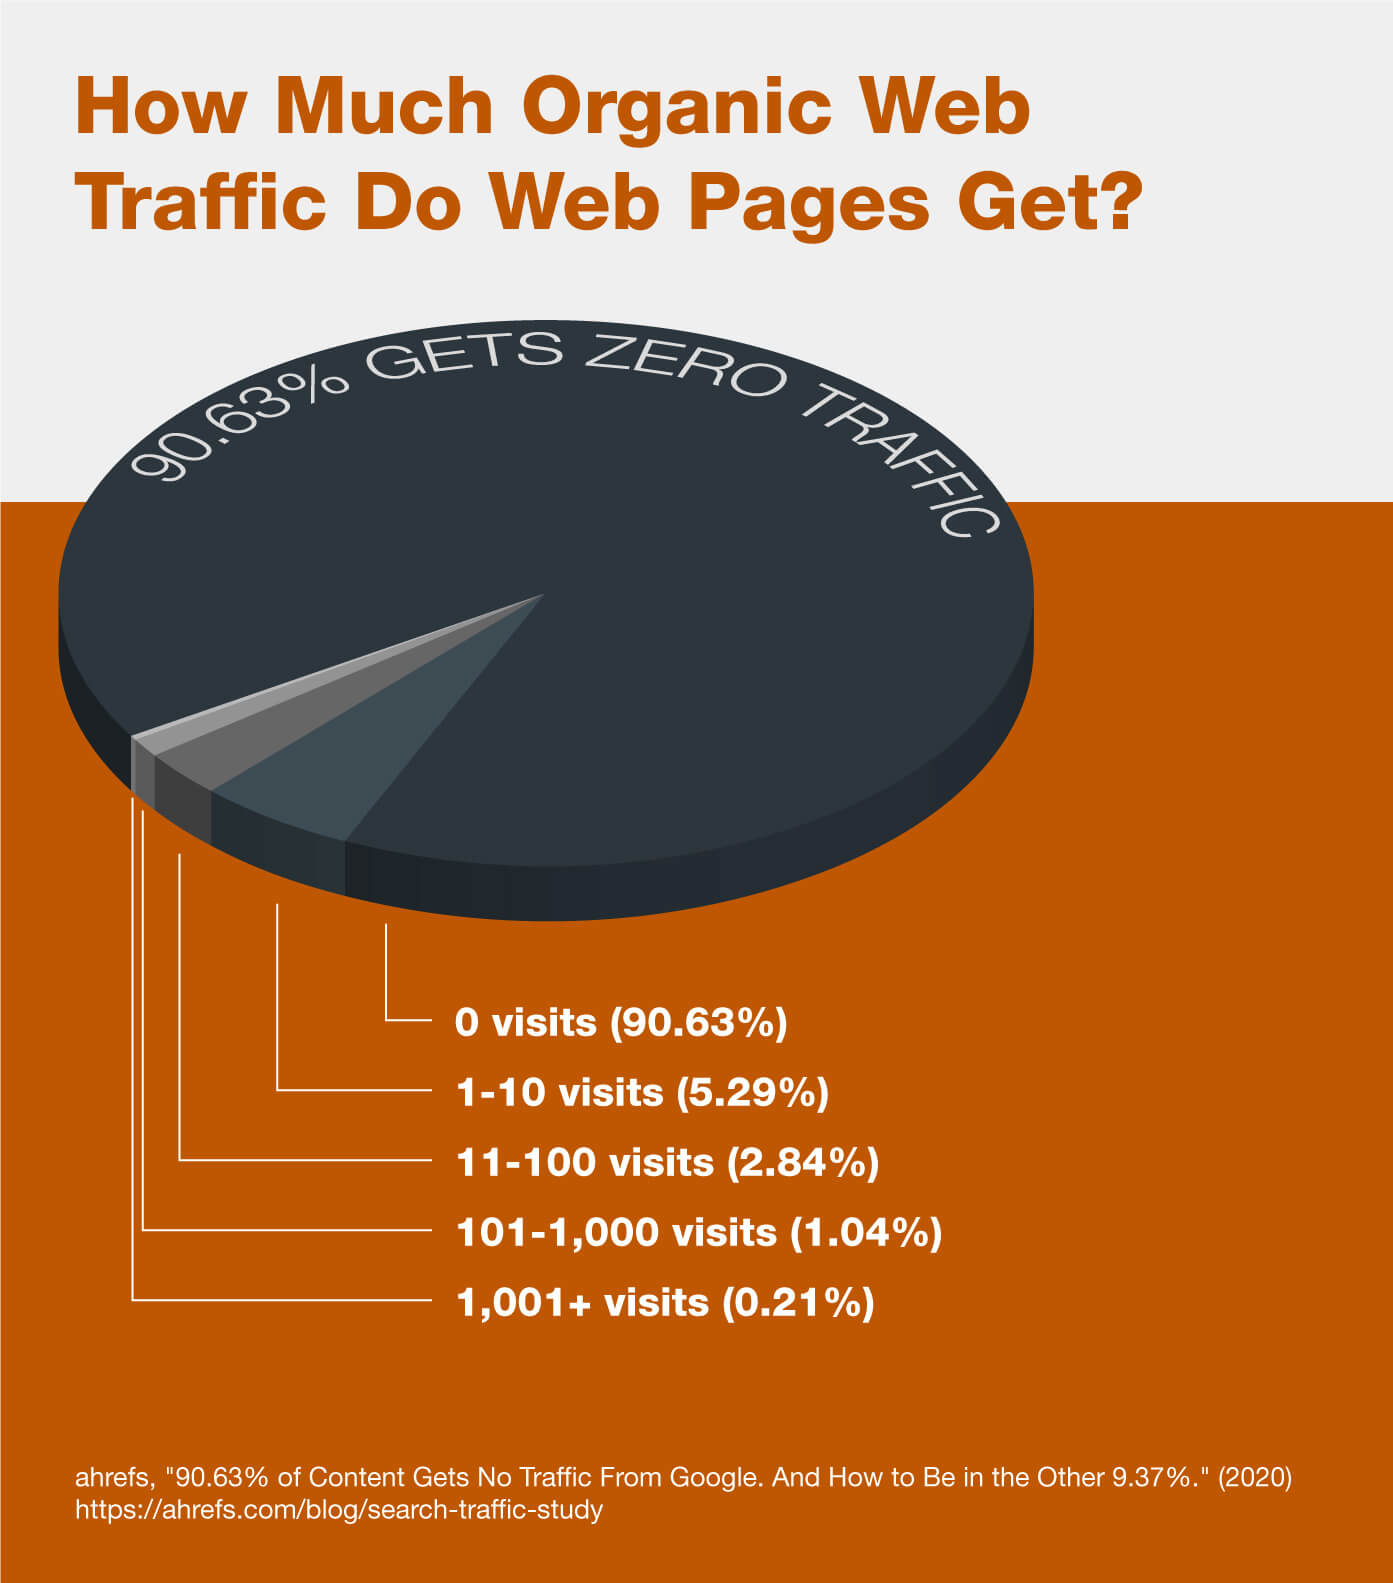 A pie chart that shows what percentage of web pages receive organic web traffic